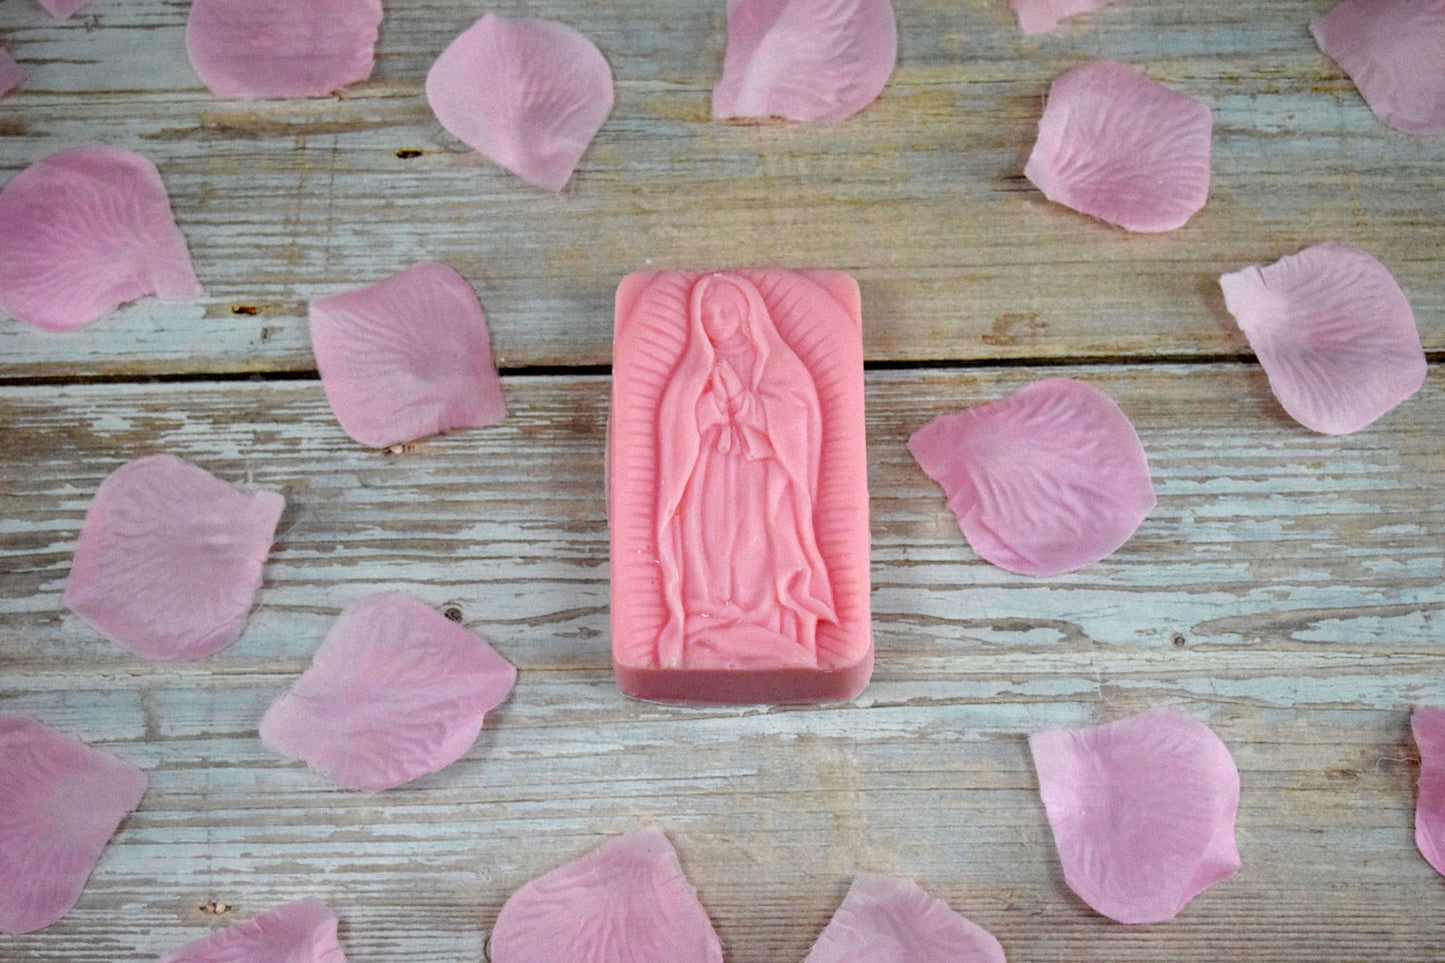 Our Lady of Guadalupe Rose Scented Soap